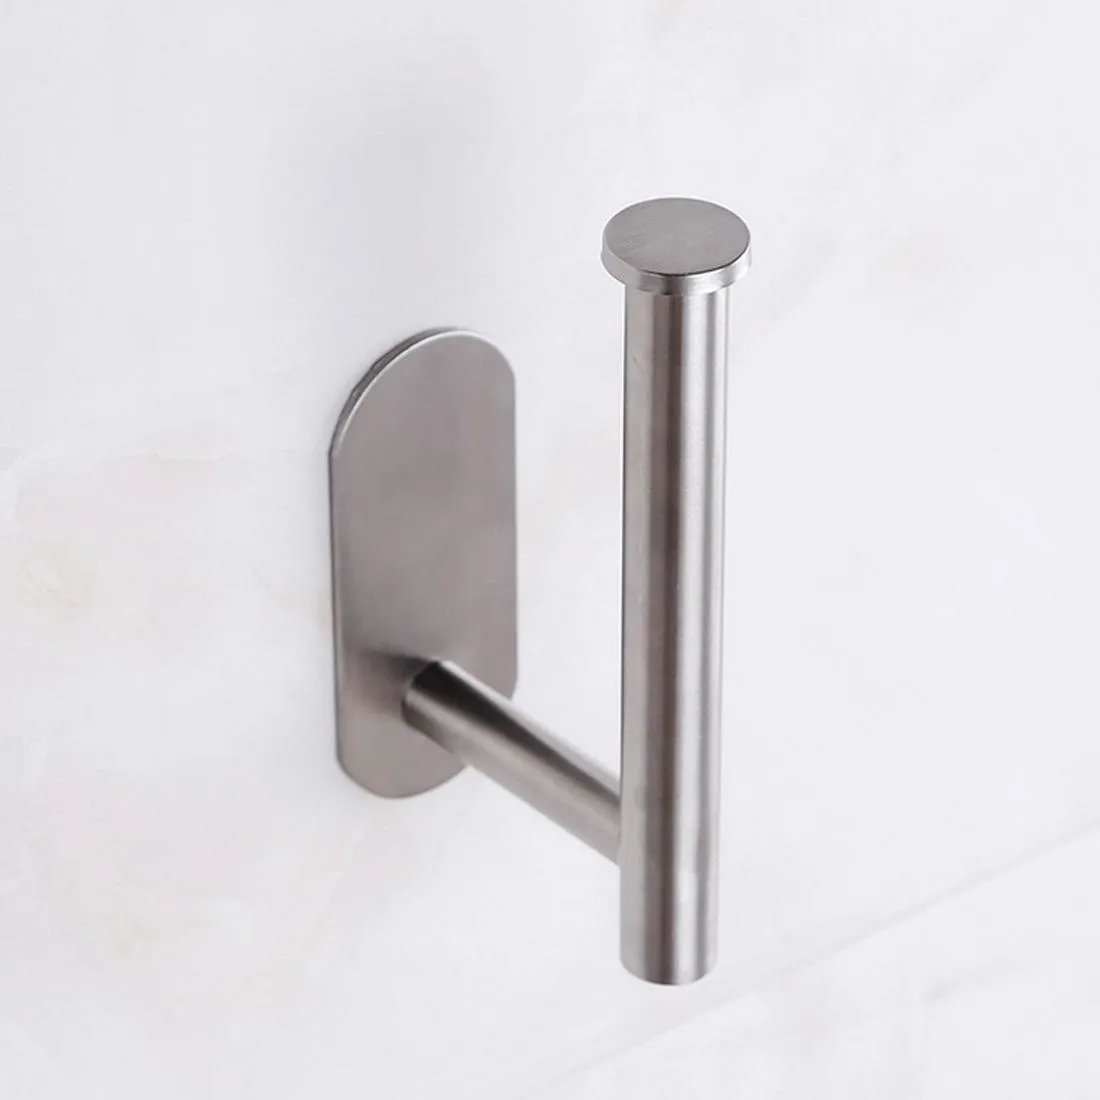 Toilet Paper Holders Stainless Steel Rack Kitchen And Bathroom Hardware Pendant Hole Free Roll 3 COLORSToilet